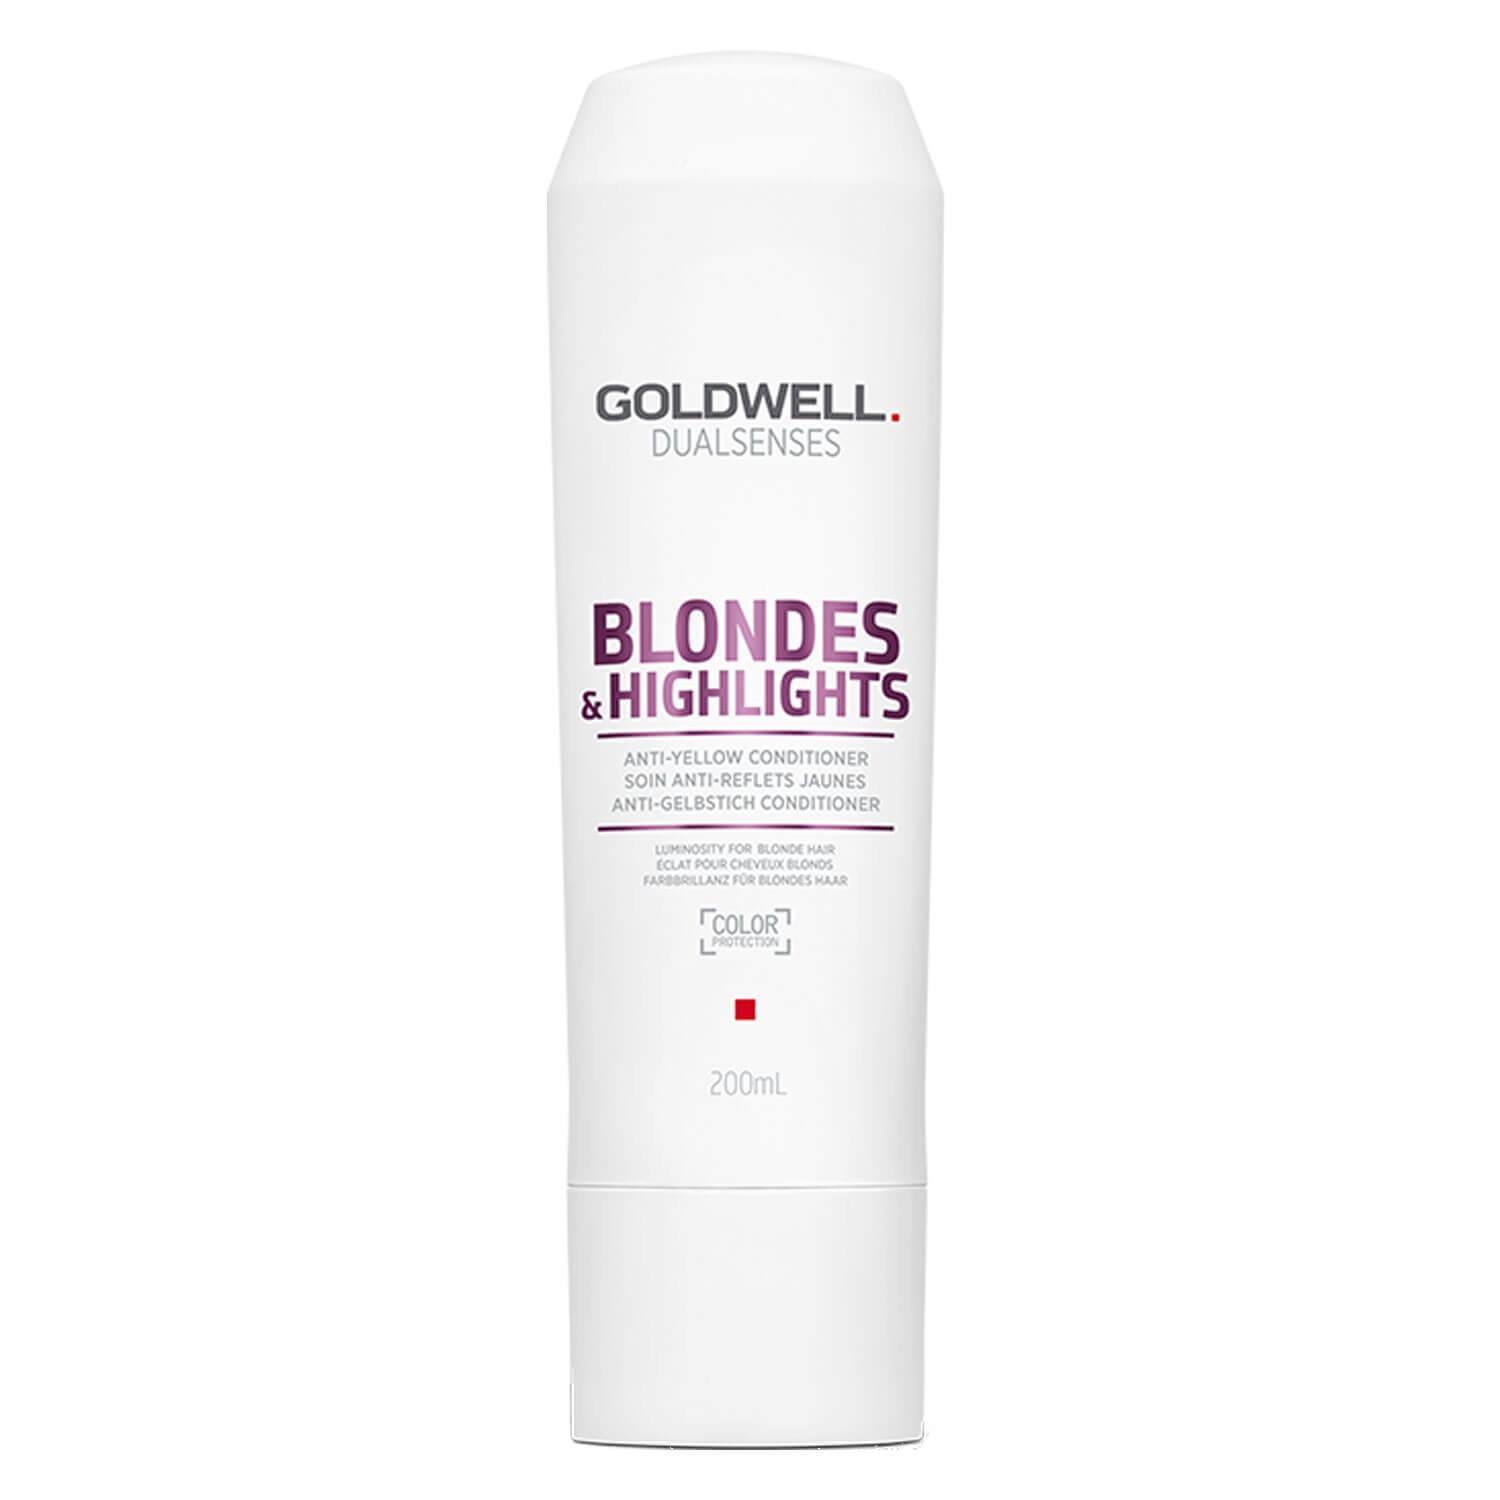 Product image from Dualsenses Blondes & Highlights - Anti-Yellow Conditioner